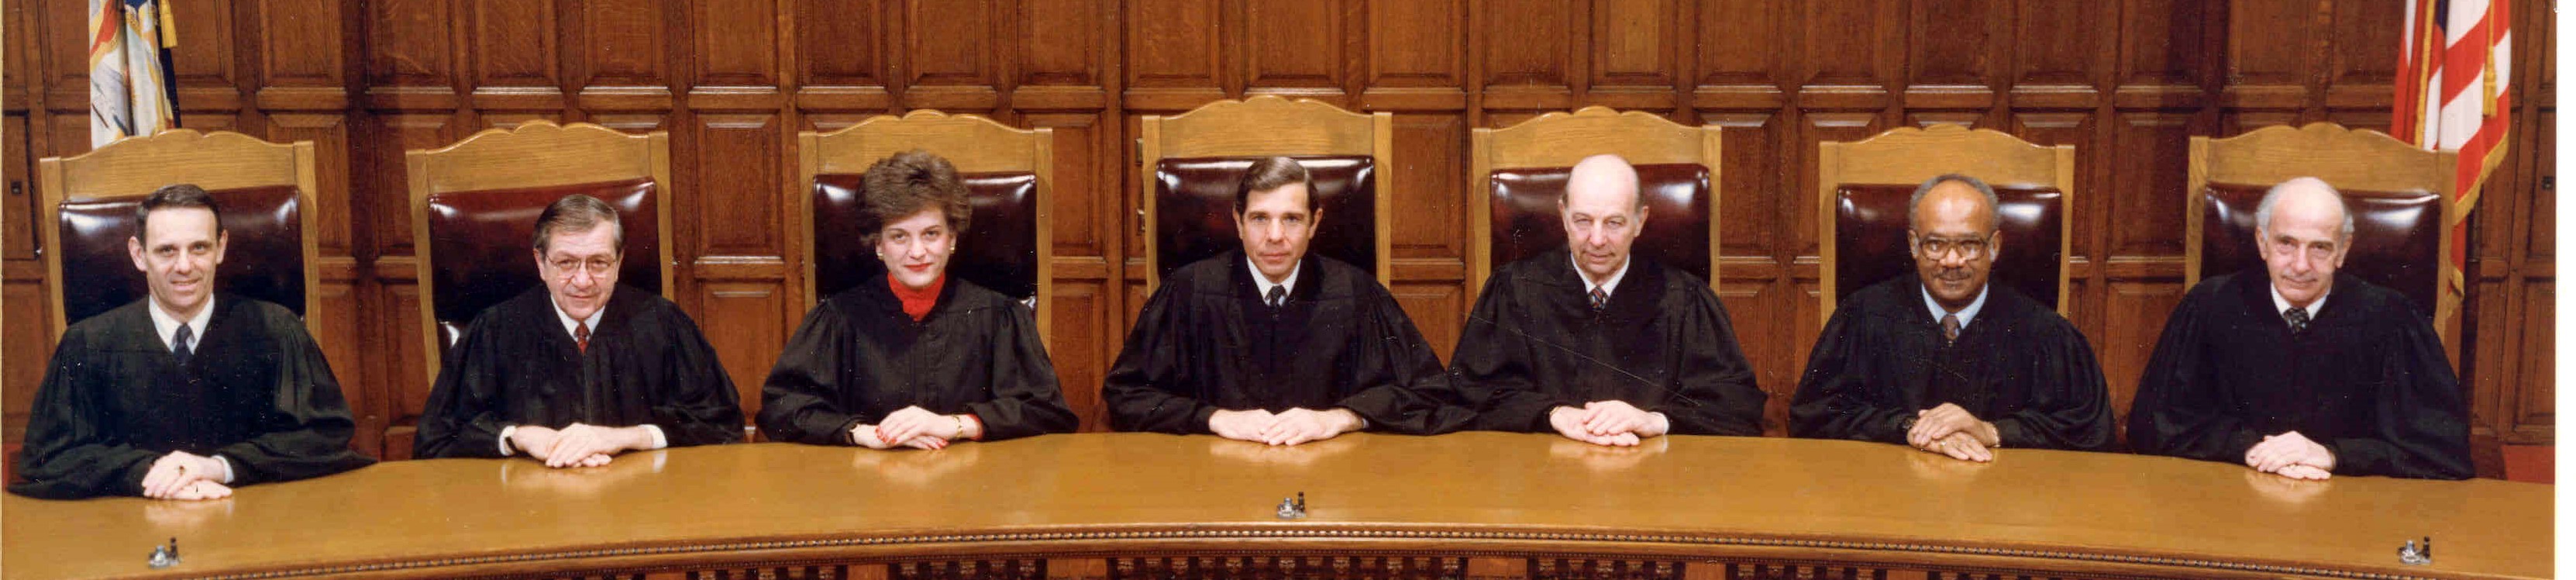 Judges on the Court of Appeals Bench, 1987